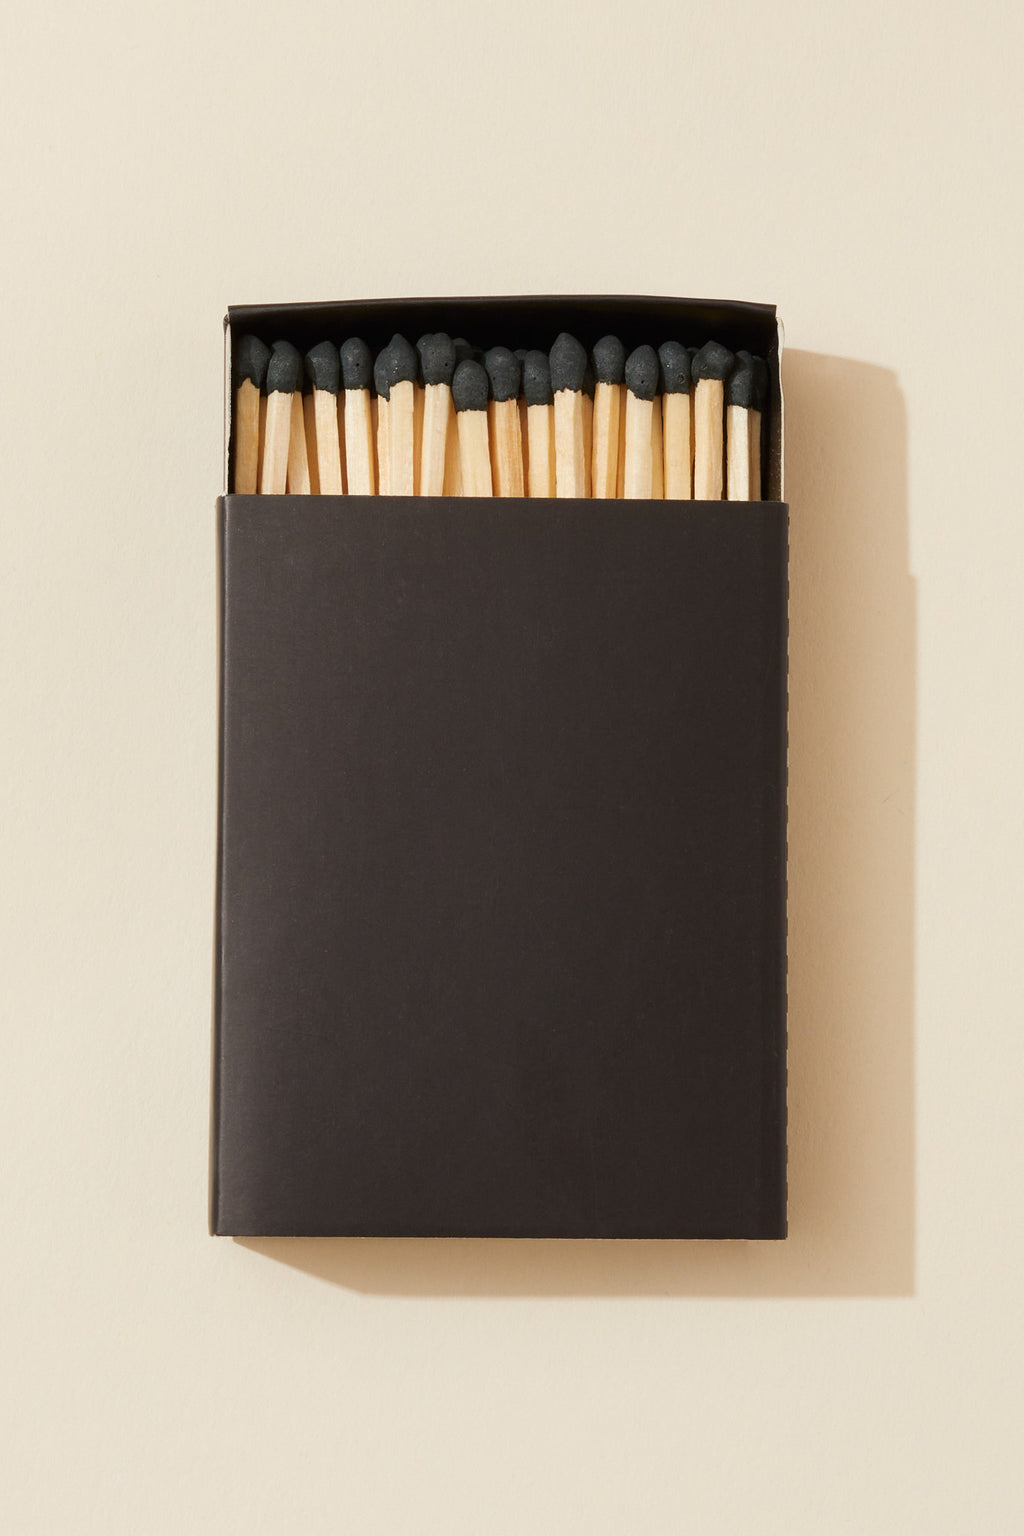 Bulk 3 Black Matches Colored Matches Candle Matches Long Matches Wooden  Matches Safety Matches 